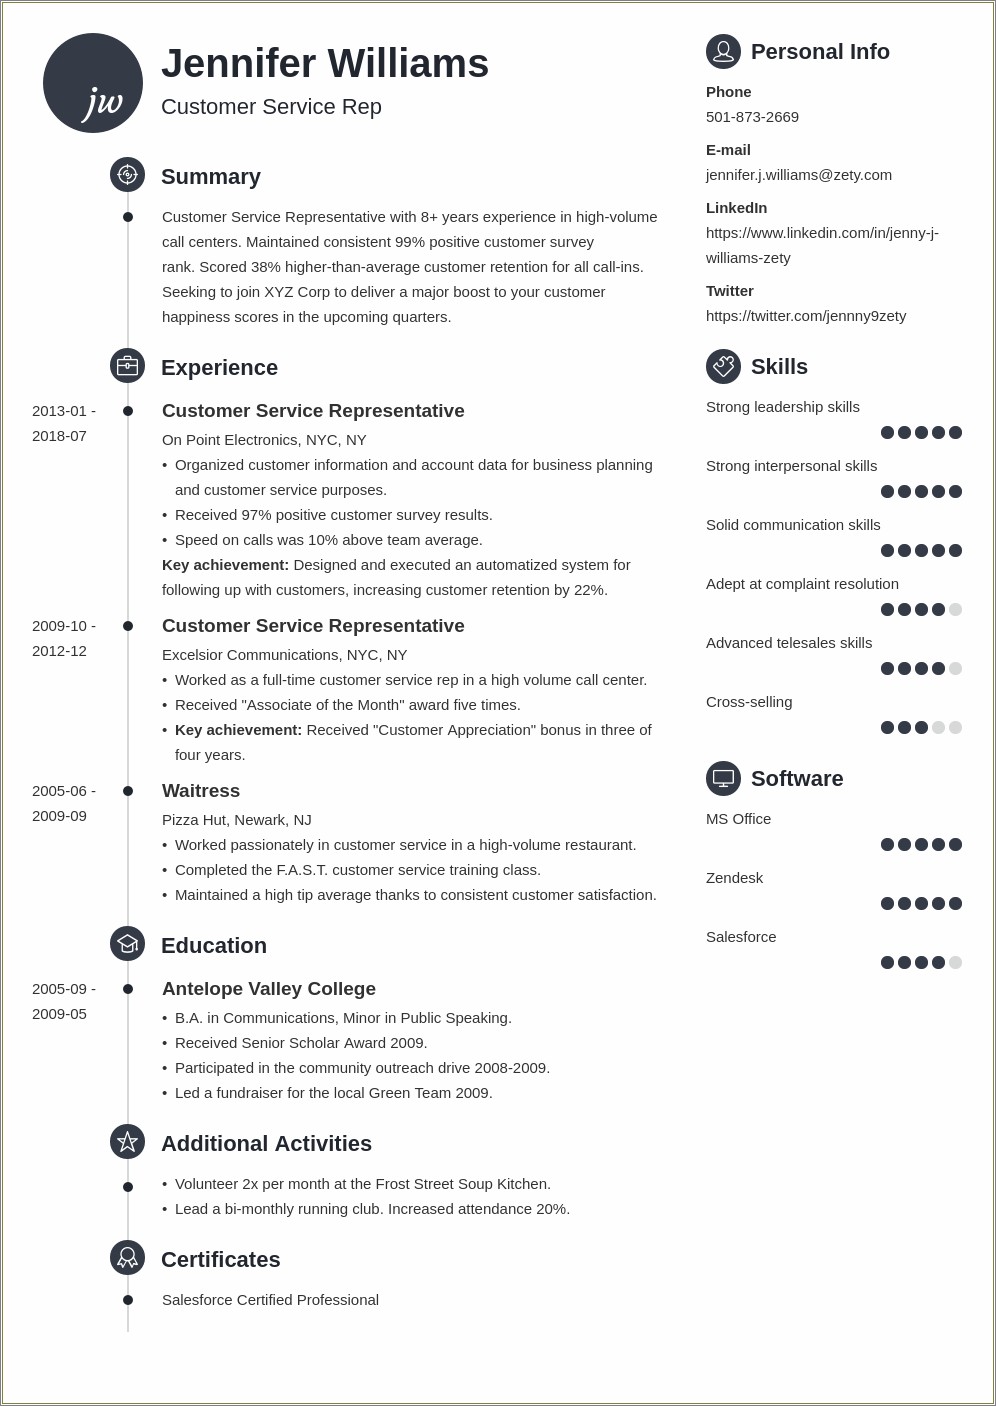 Different Activities To Put On Resume